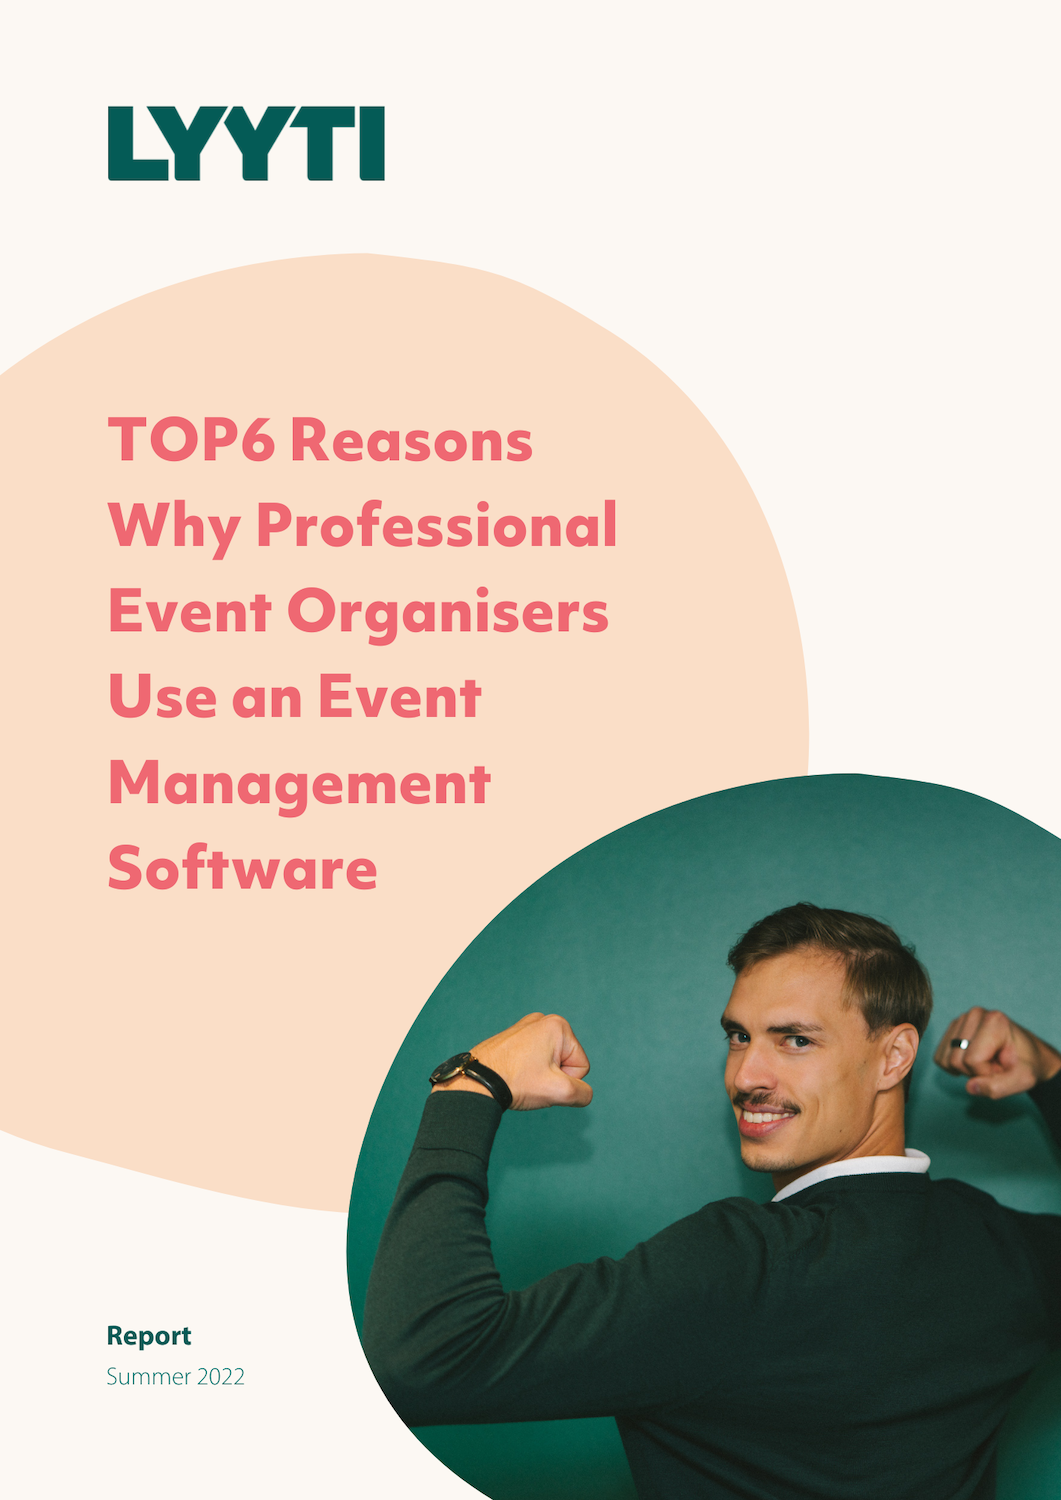 Reasons to use an event management software-1